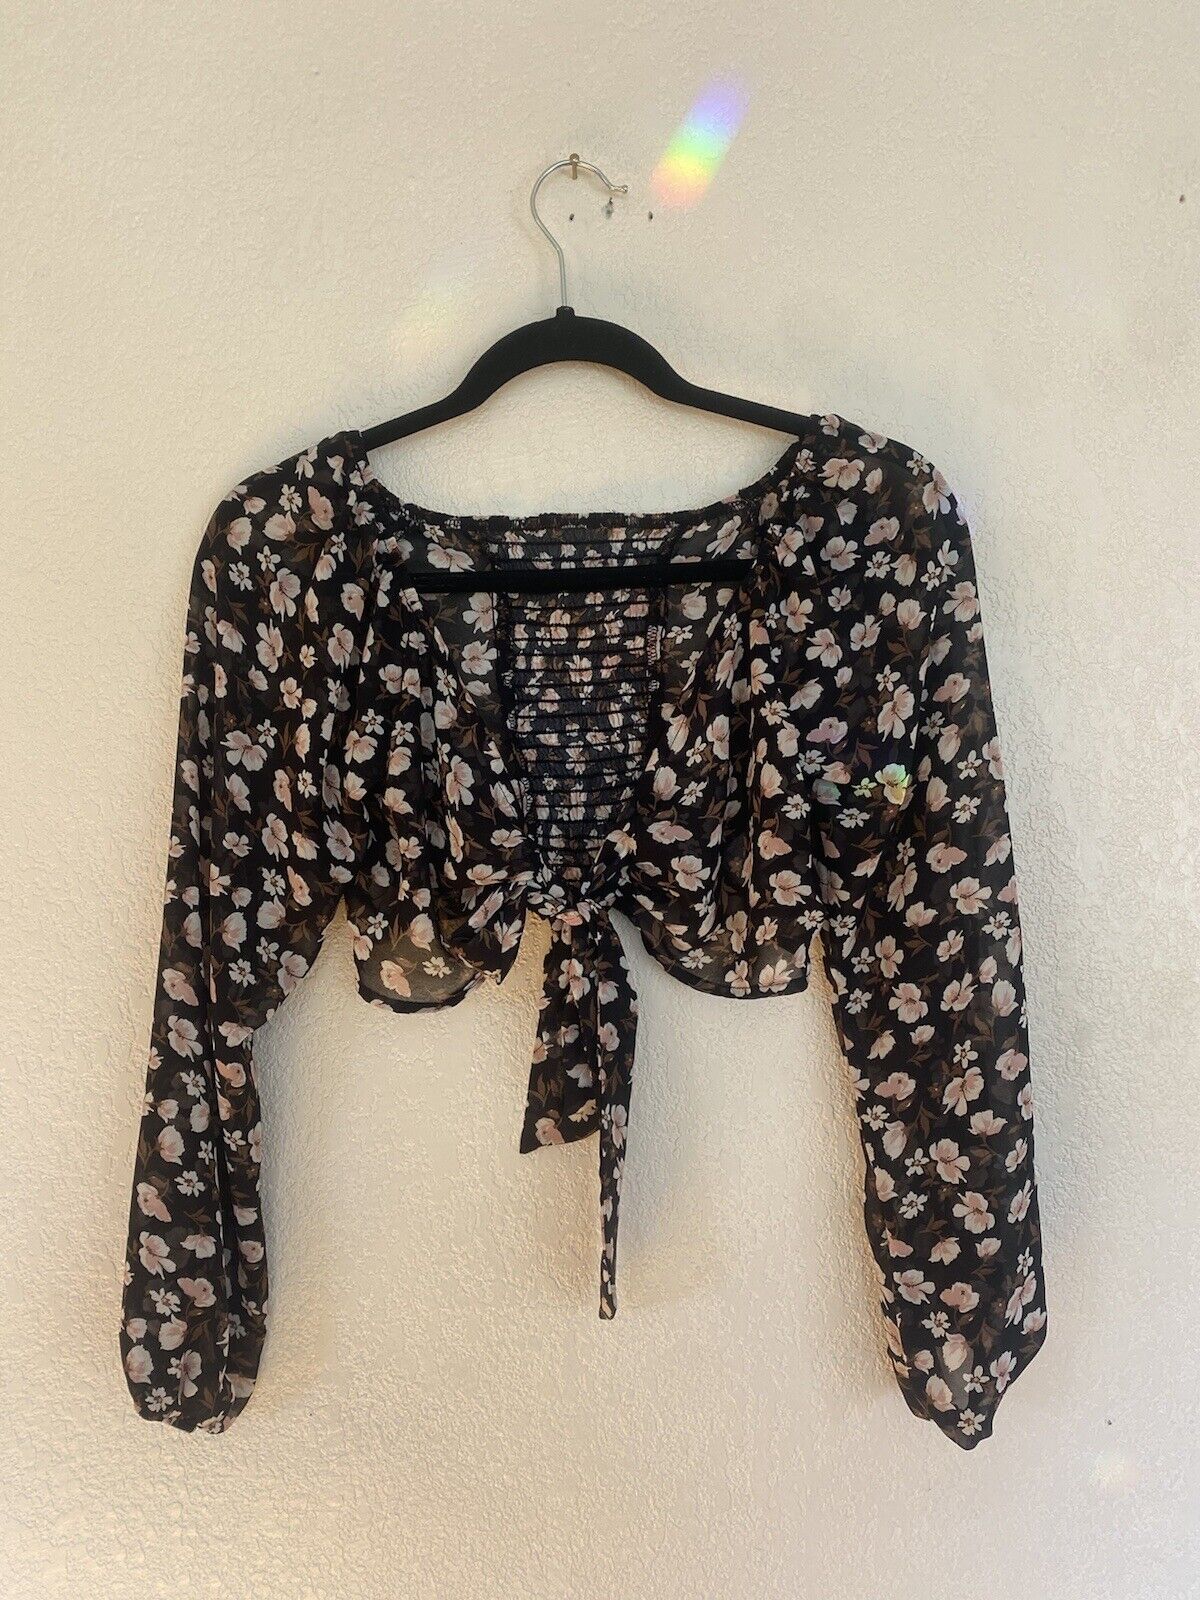 Brown Floral Tie-Front Top - Unbranded - Women's Small # 2185